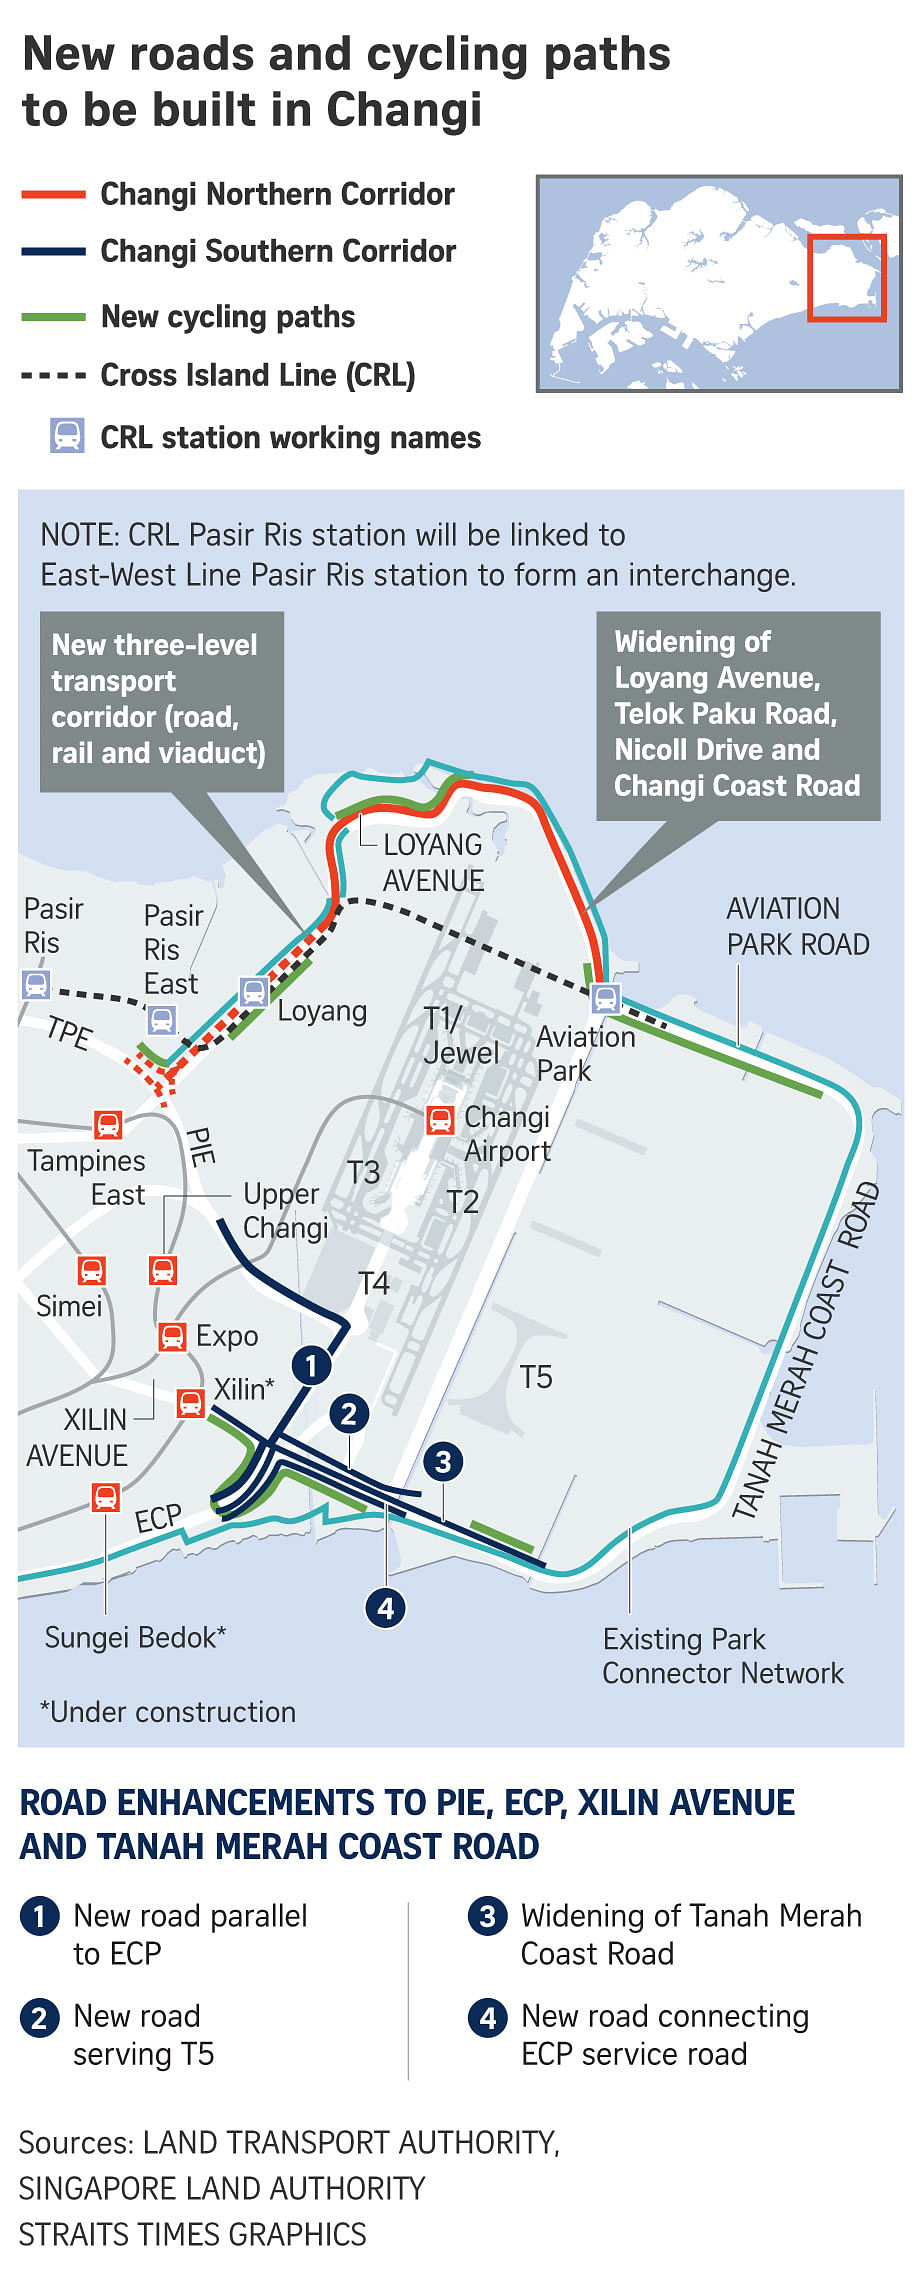 Plans in the pipeline for Changi Airport's Terminal 5 to be linked to 2 new  MRT lines